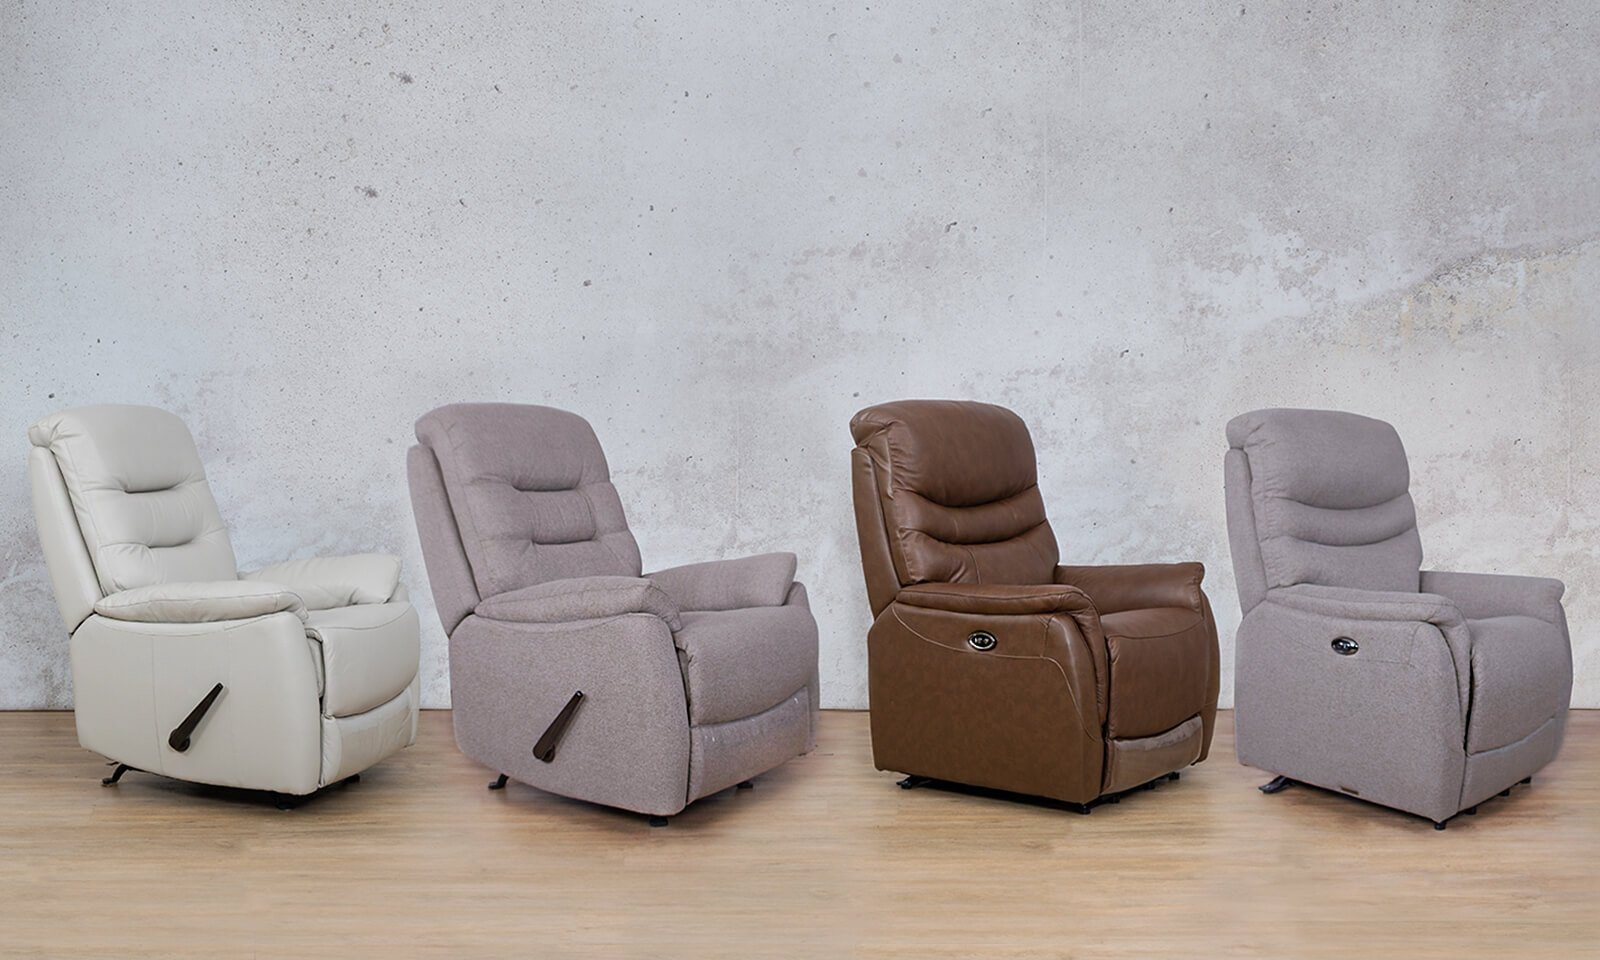 MANUAL RECLINERS VS ELECTRIC RECLINERS: WHICH SHOULD YOU CHOOSE?